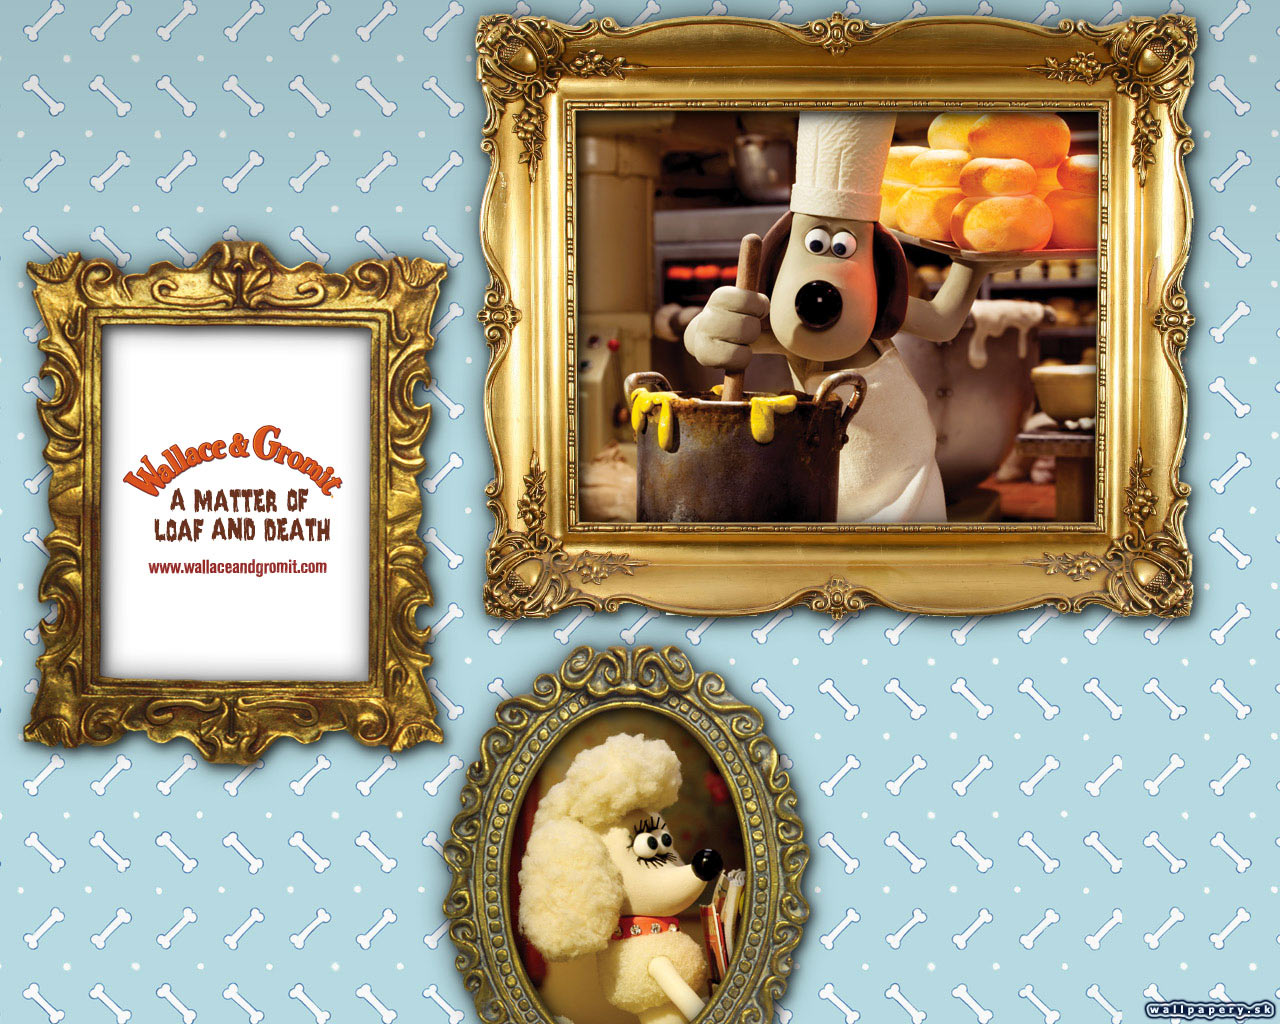 Wallace & Gromit Episode 1: Fright of the Bumblebees - wallpaper 8